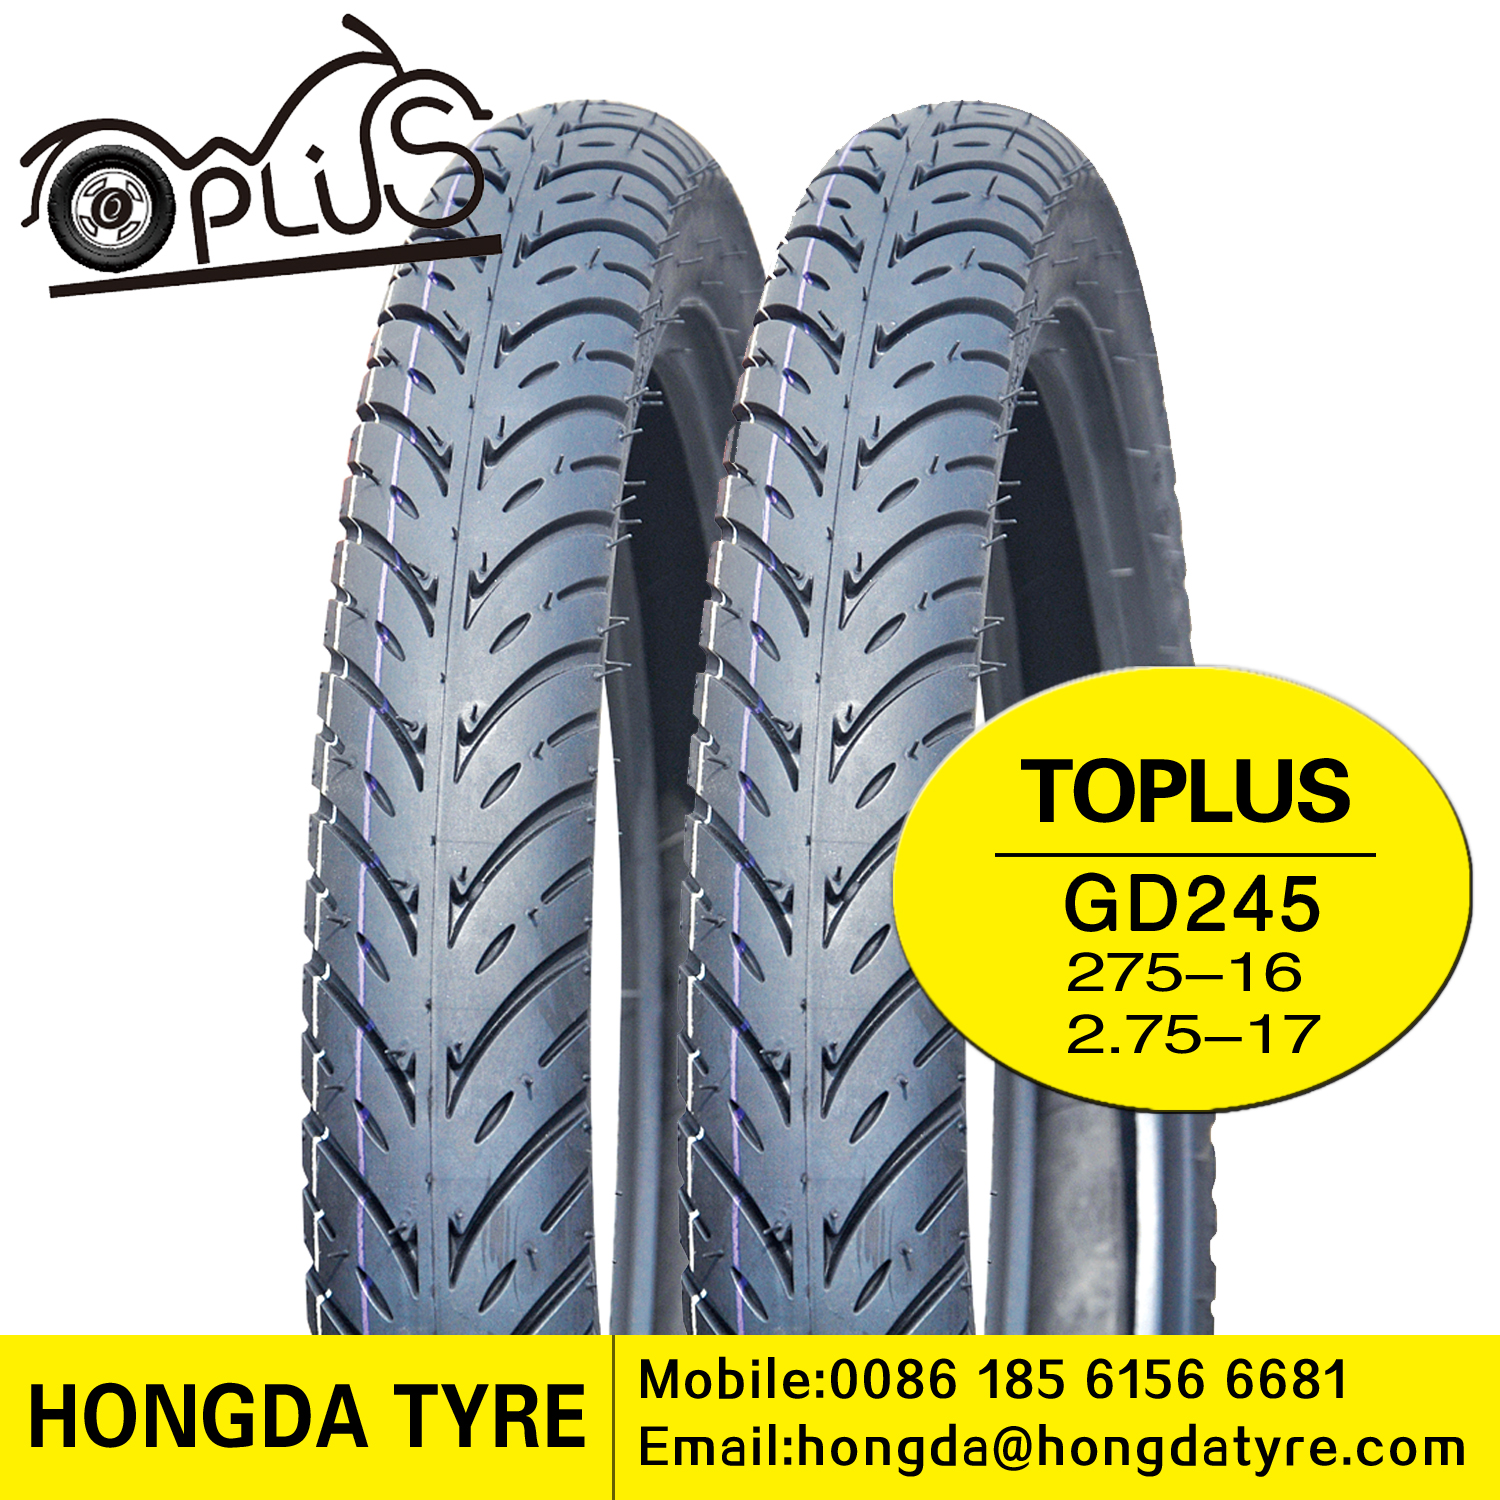 Motorcycle tyre GD245